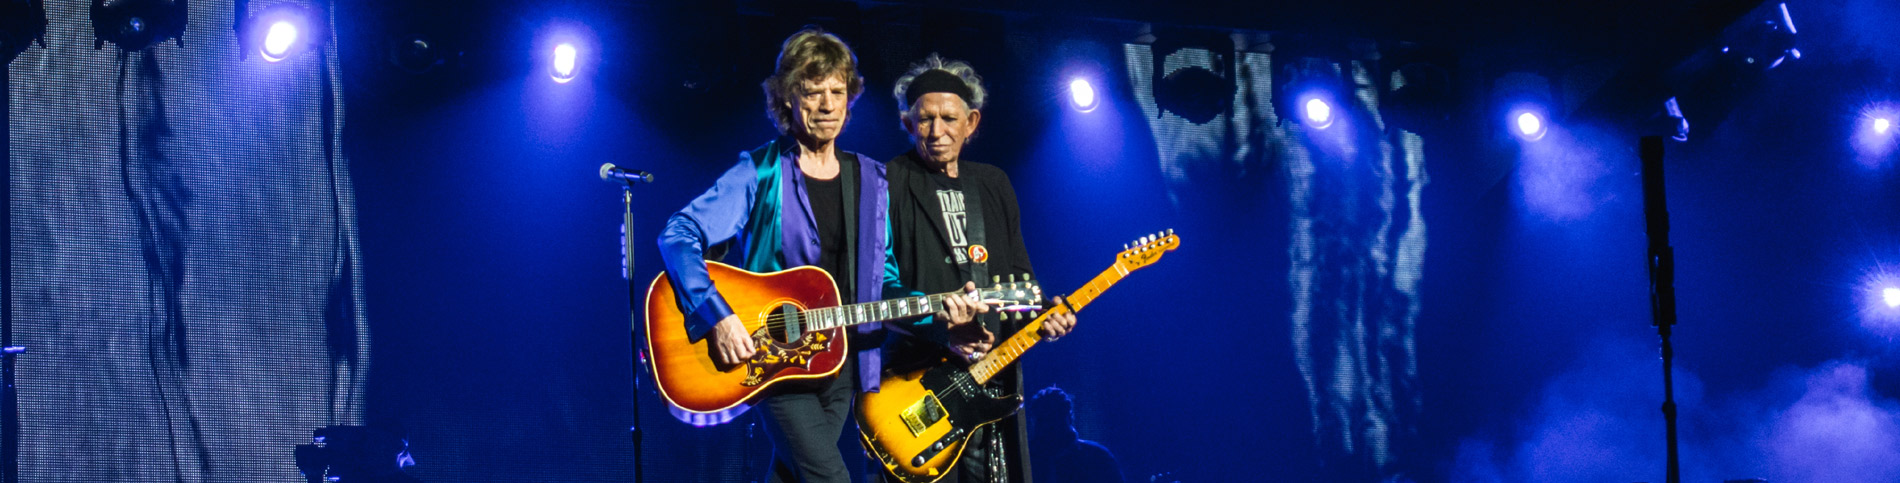 The Rolling Stones Houston TX Tickets